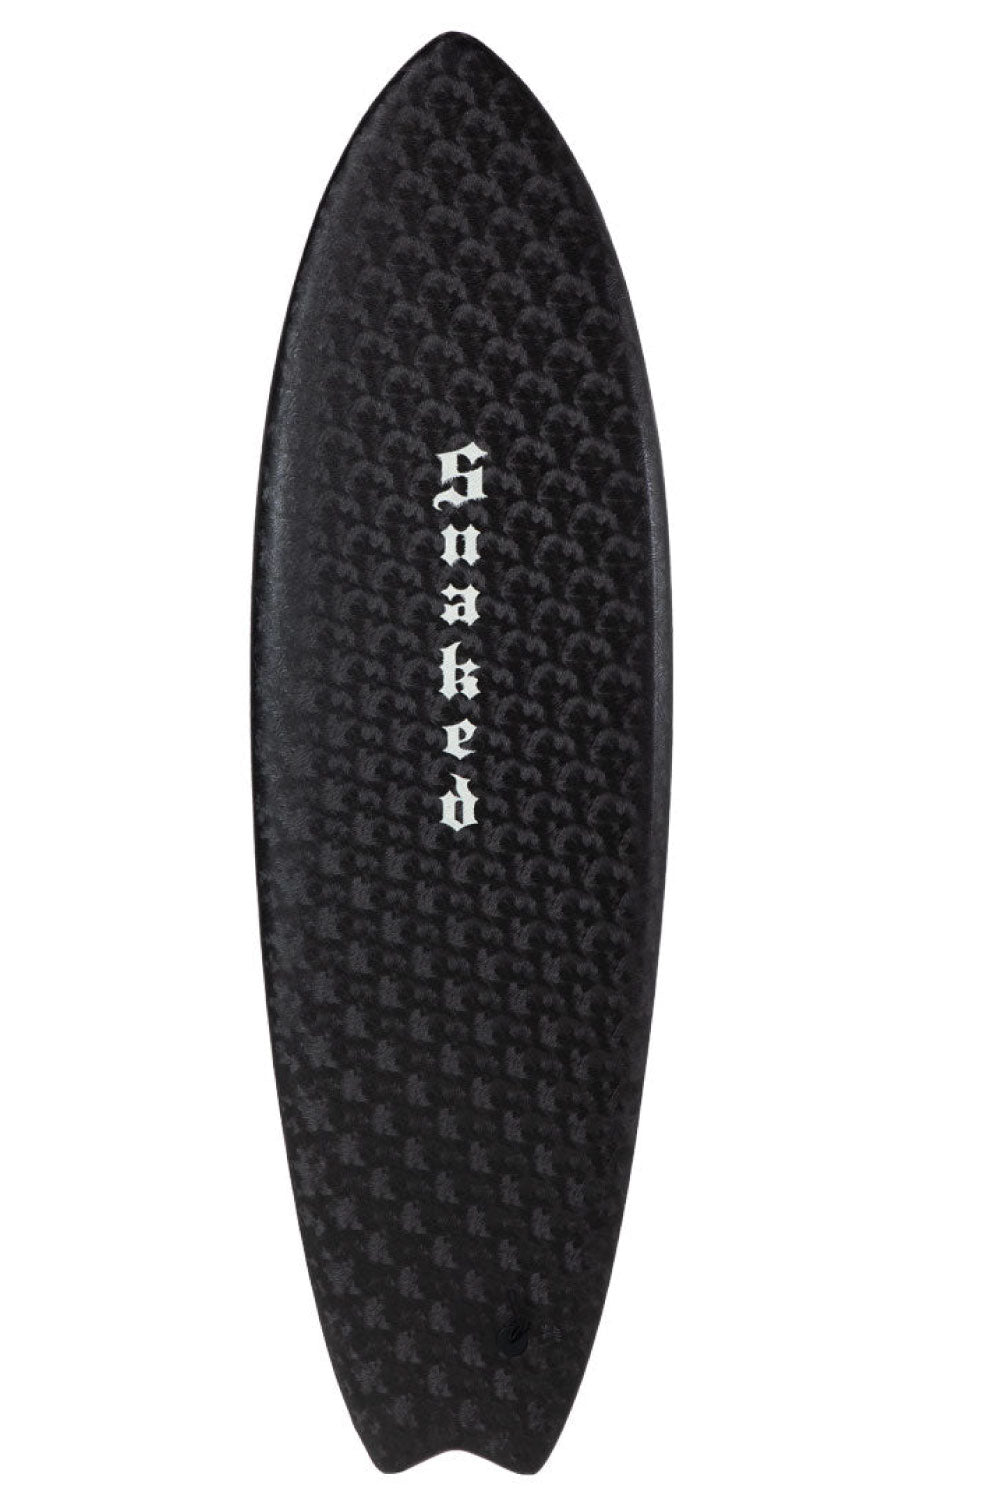 HOY Skull 6.0 Snaked Softboard - Comes with fins